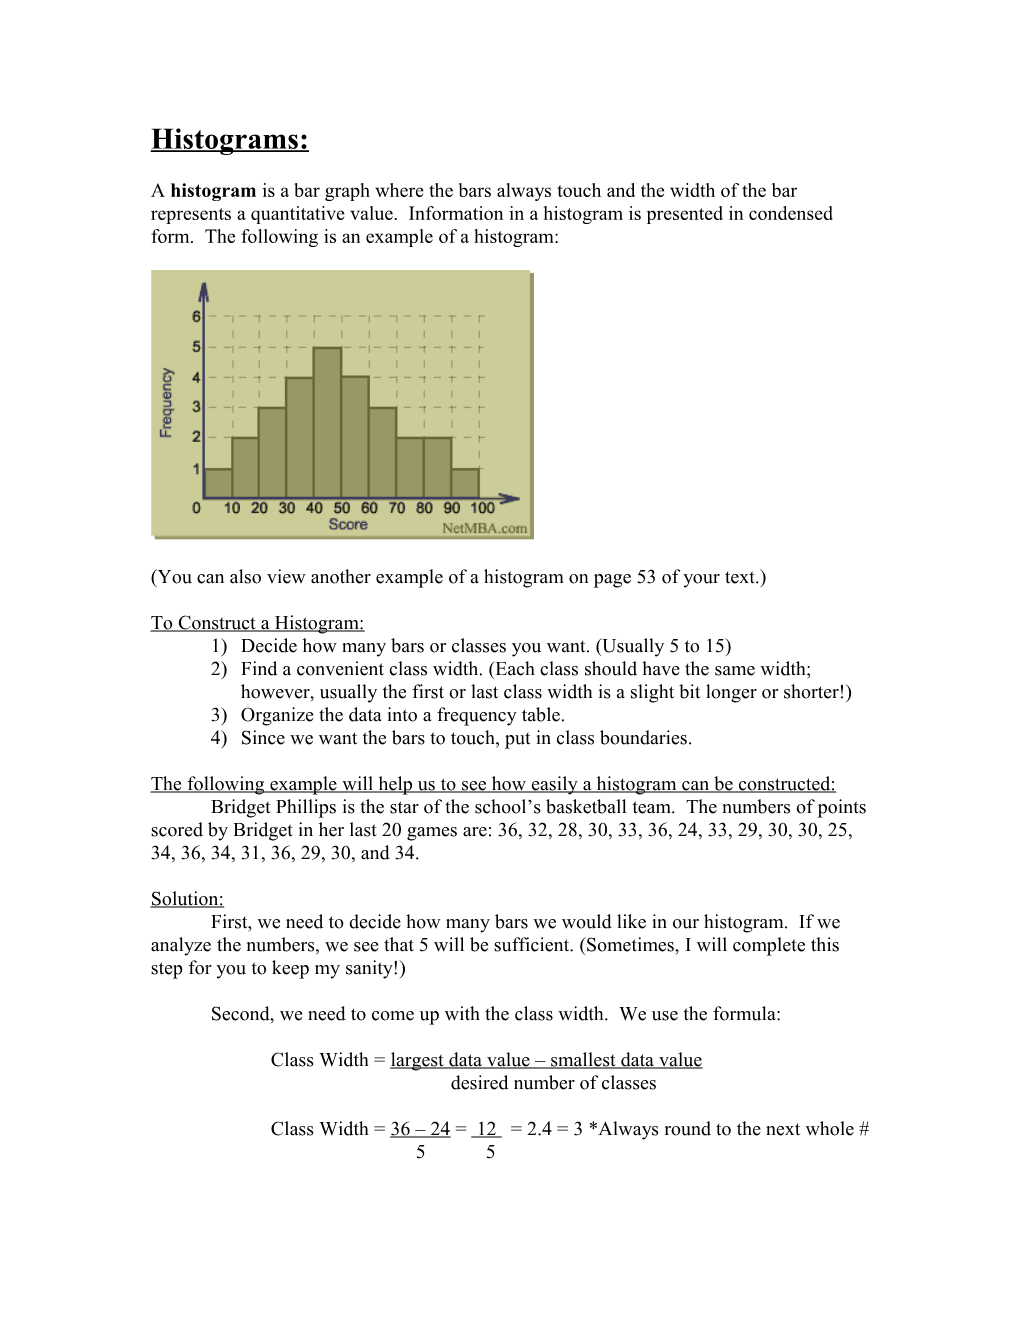 You Can Also View Another Example of a Histogram on Page 53 of Your Text.